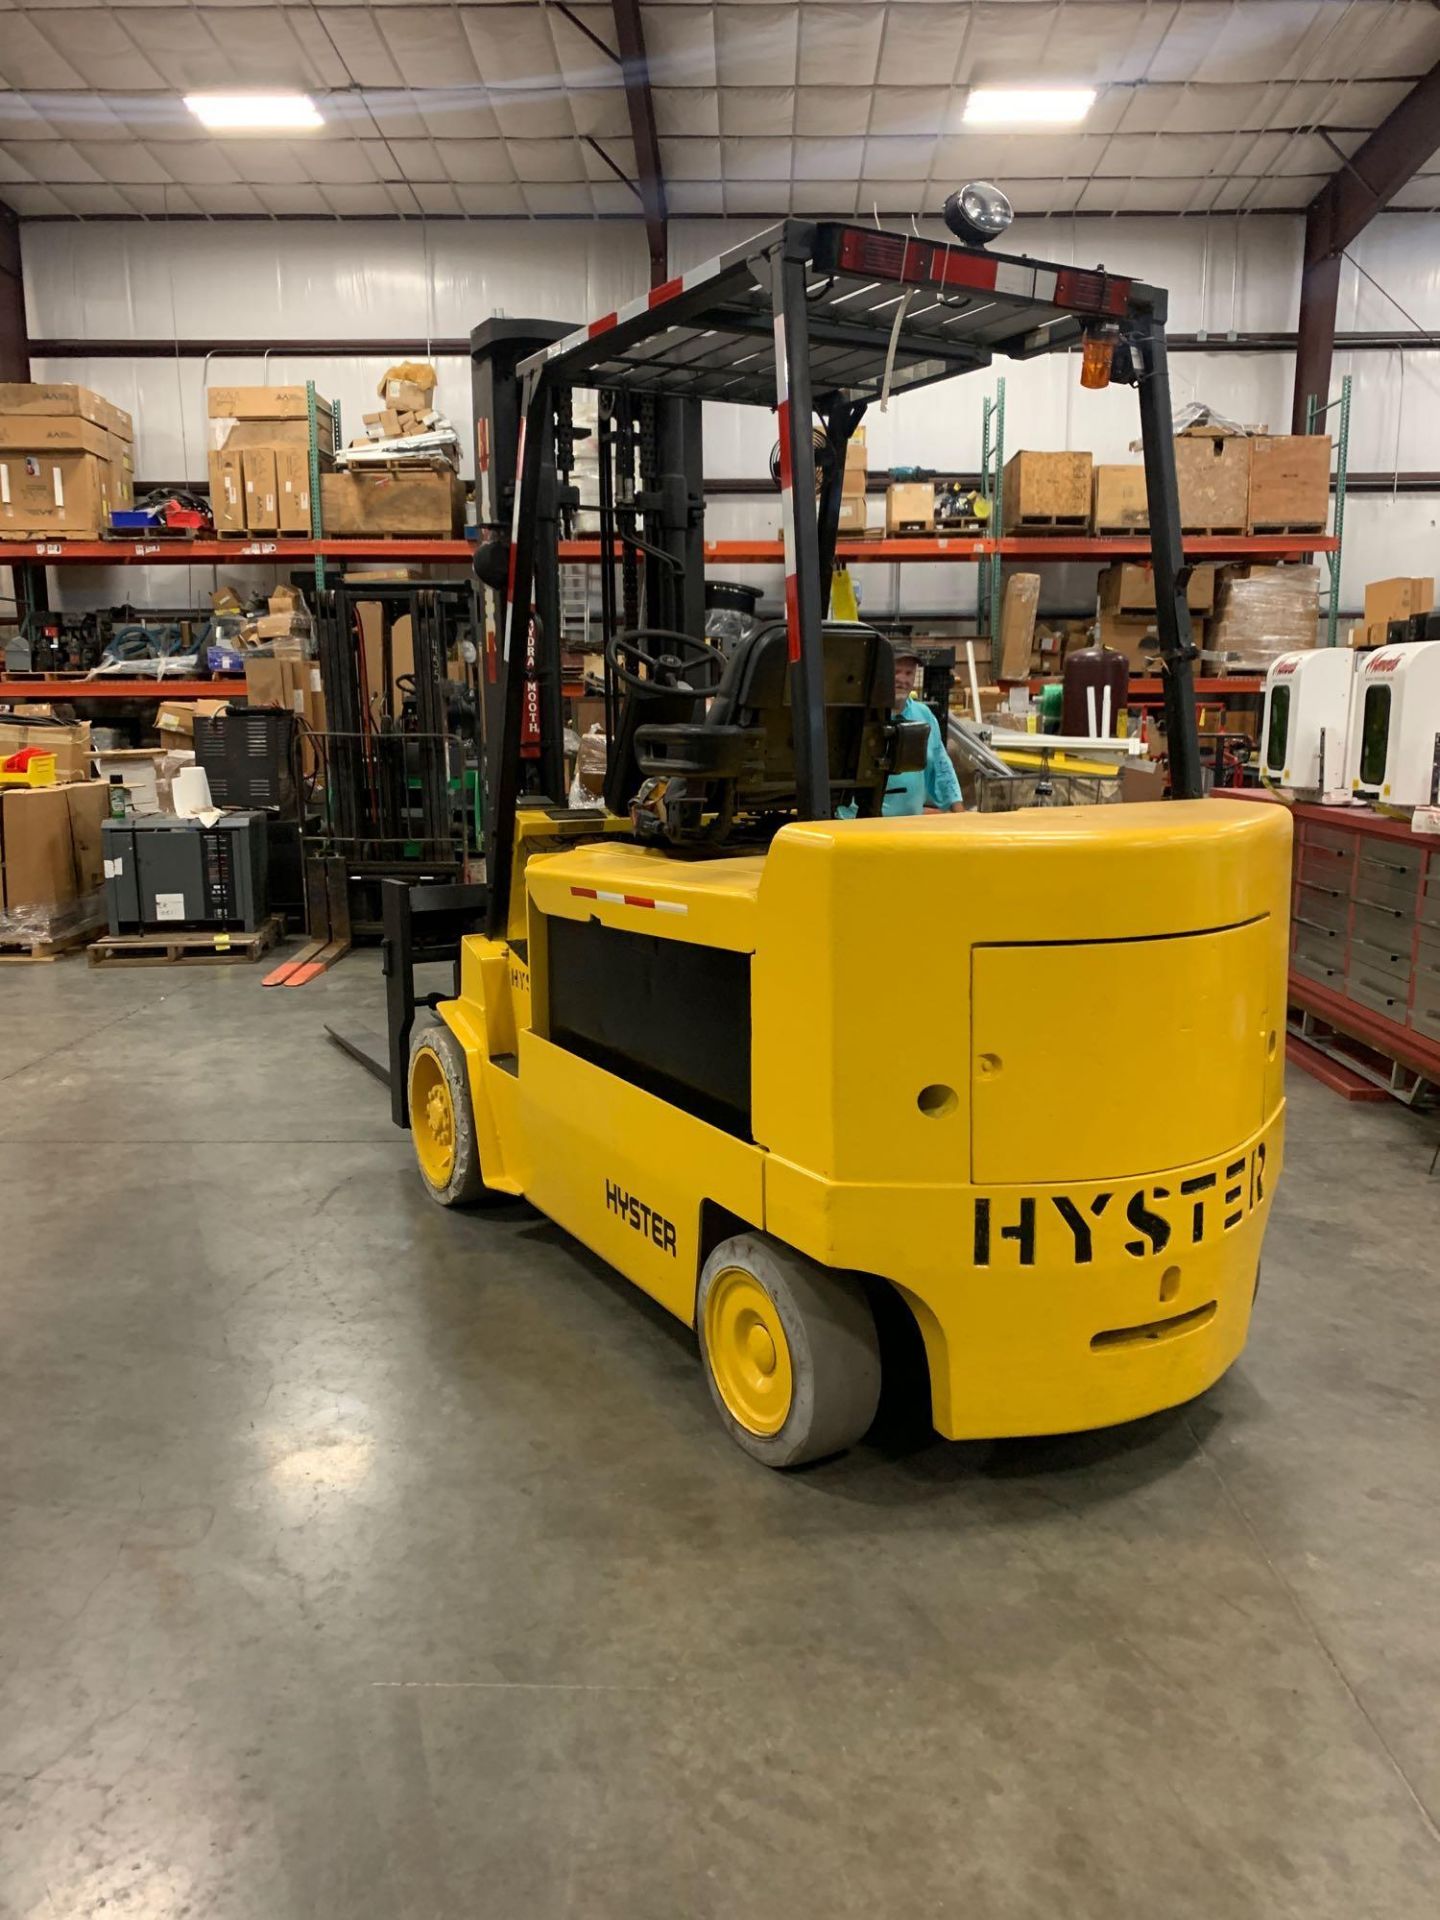 HYSTER E120XL FORKLIFT, 12,000 LB LIFT CAPACITY, ELECTRIC POWERED, - Image 3 of 8